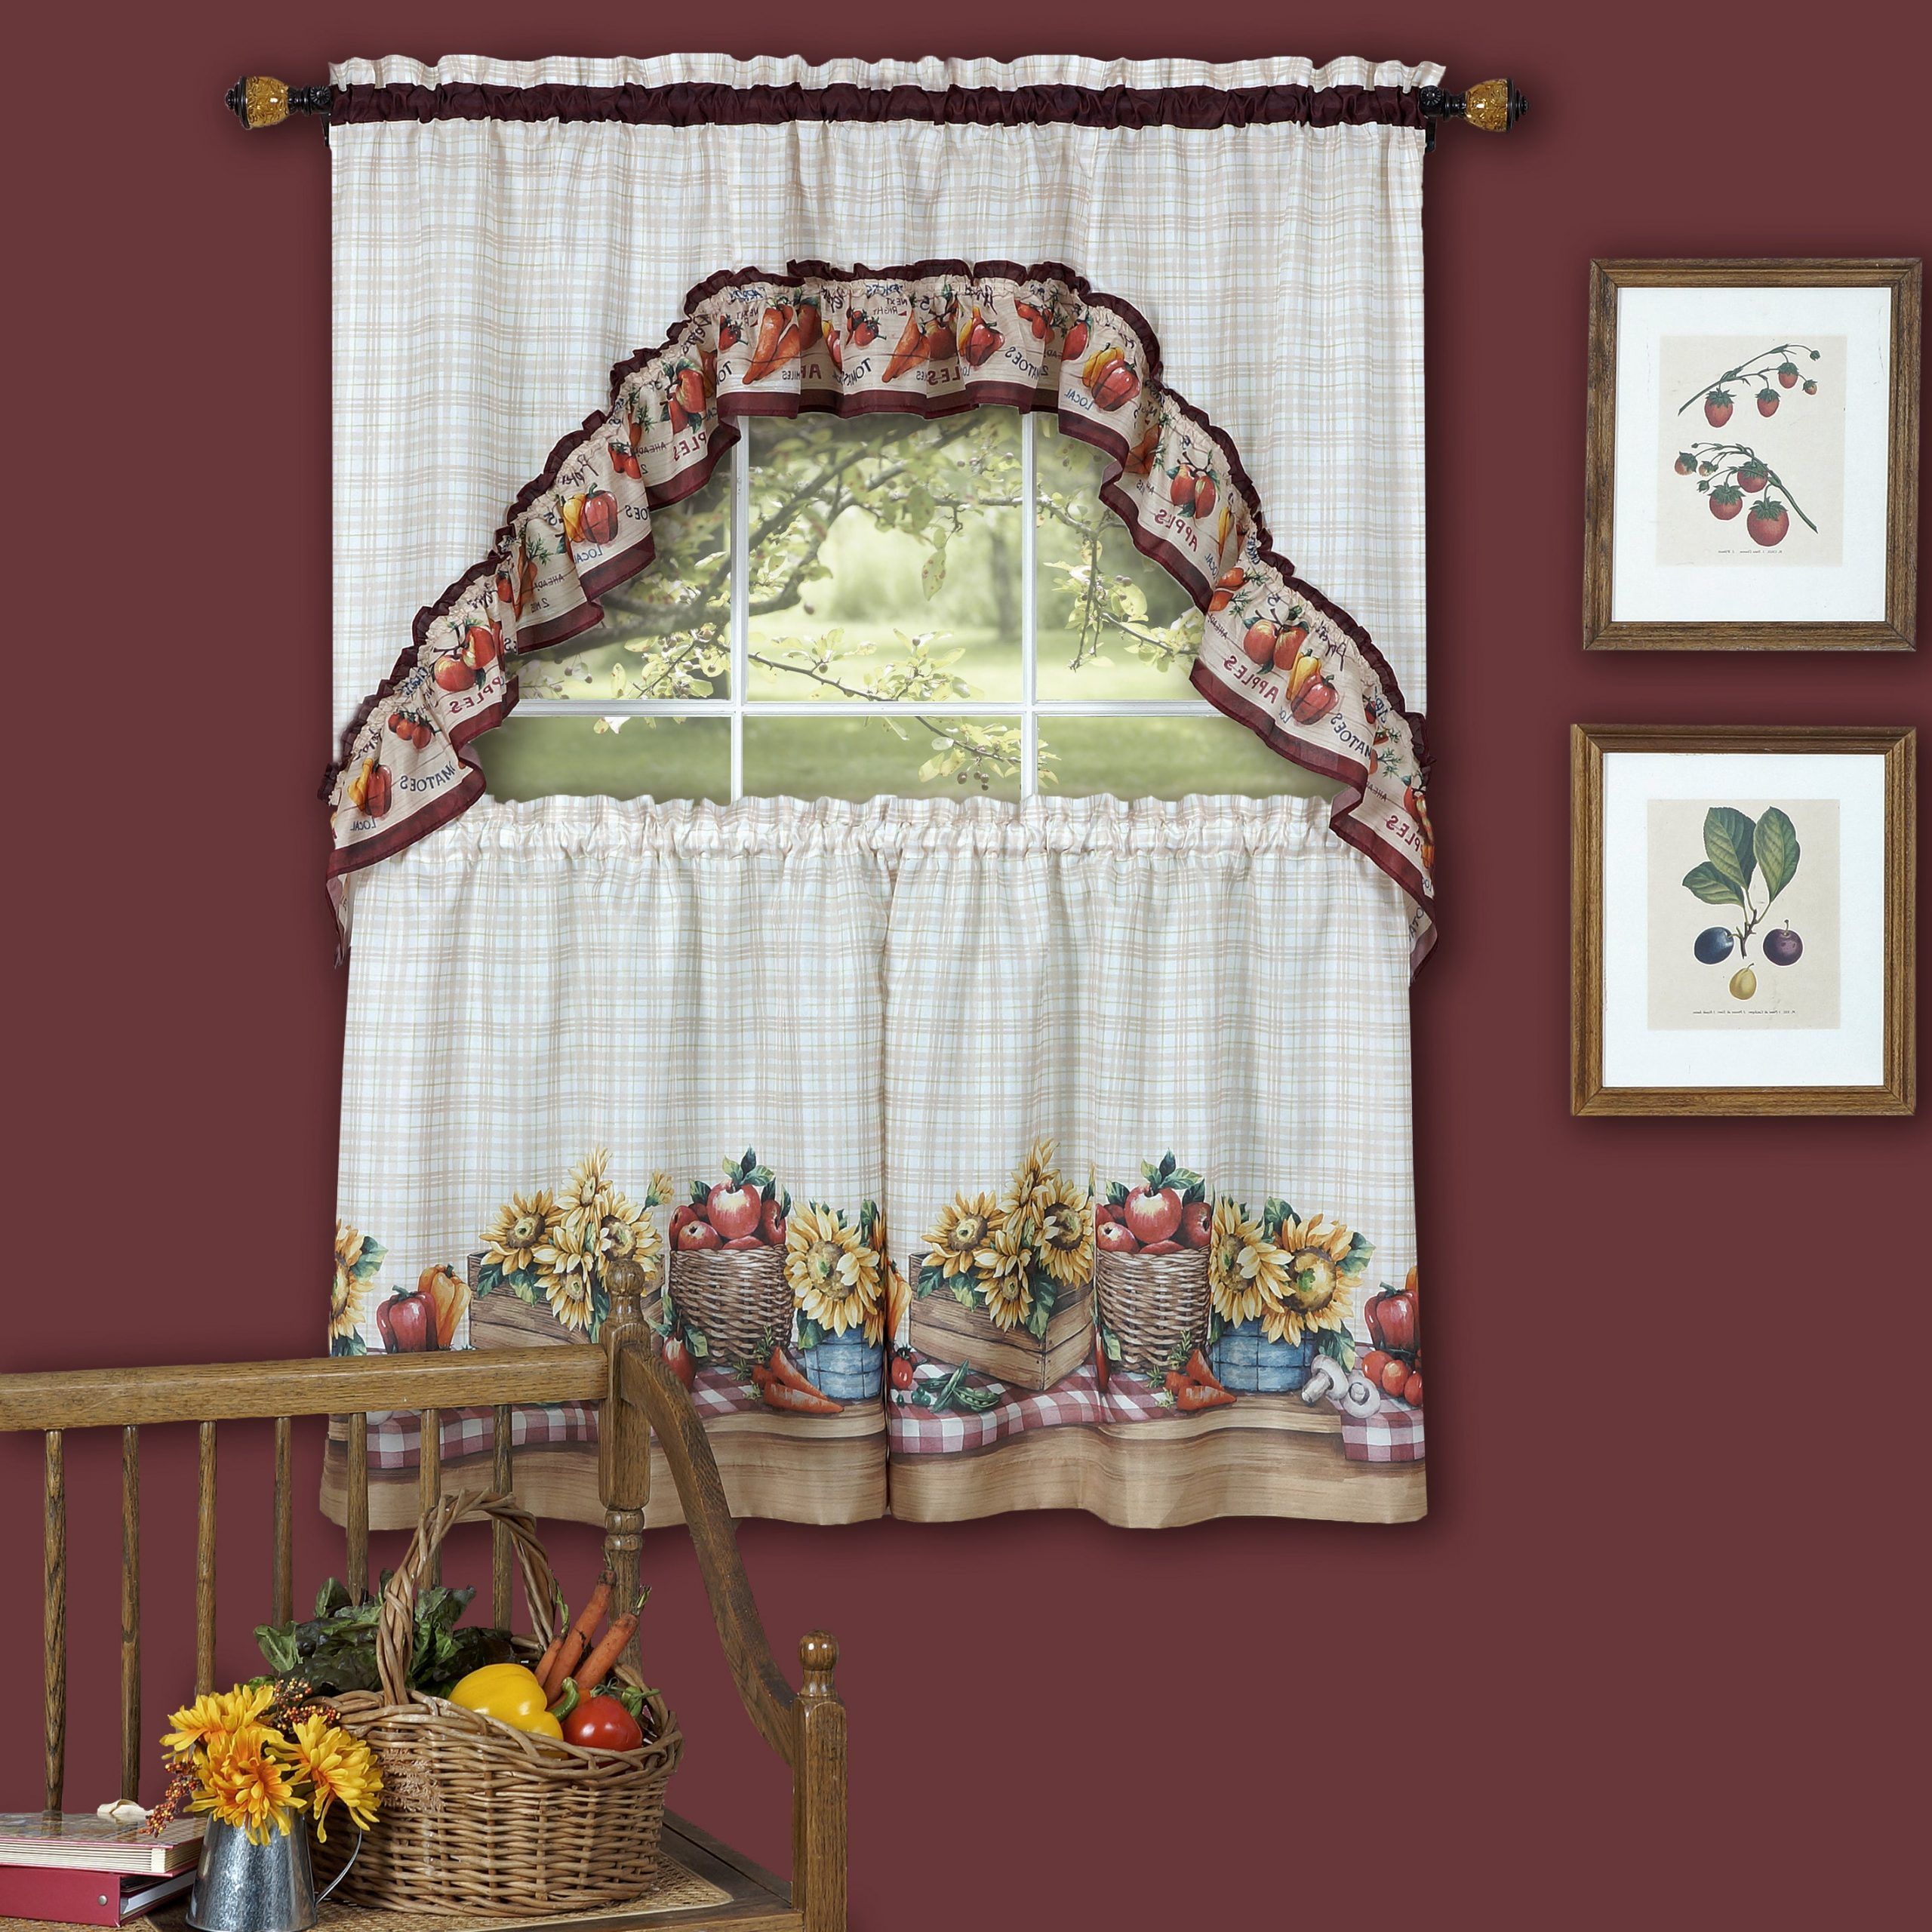 Window Curtains Sets With Colorful Marketplace Vegetable And Sunflower Print Within Most Current Traditional Two Piece Tailored Tier And Swag Window Curtains Set With  Colorful Marketplace Vegetable And Sunflower Print (View 1 of 20)